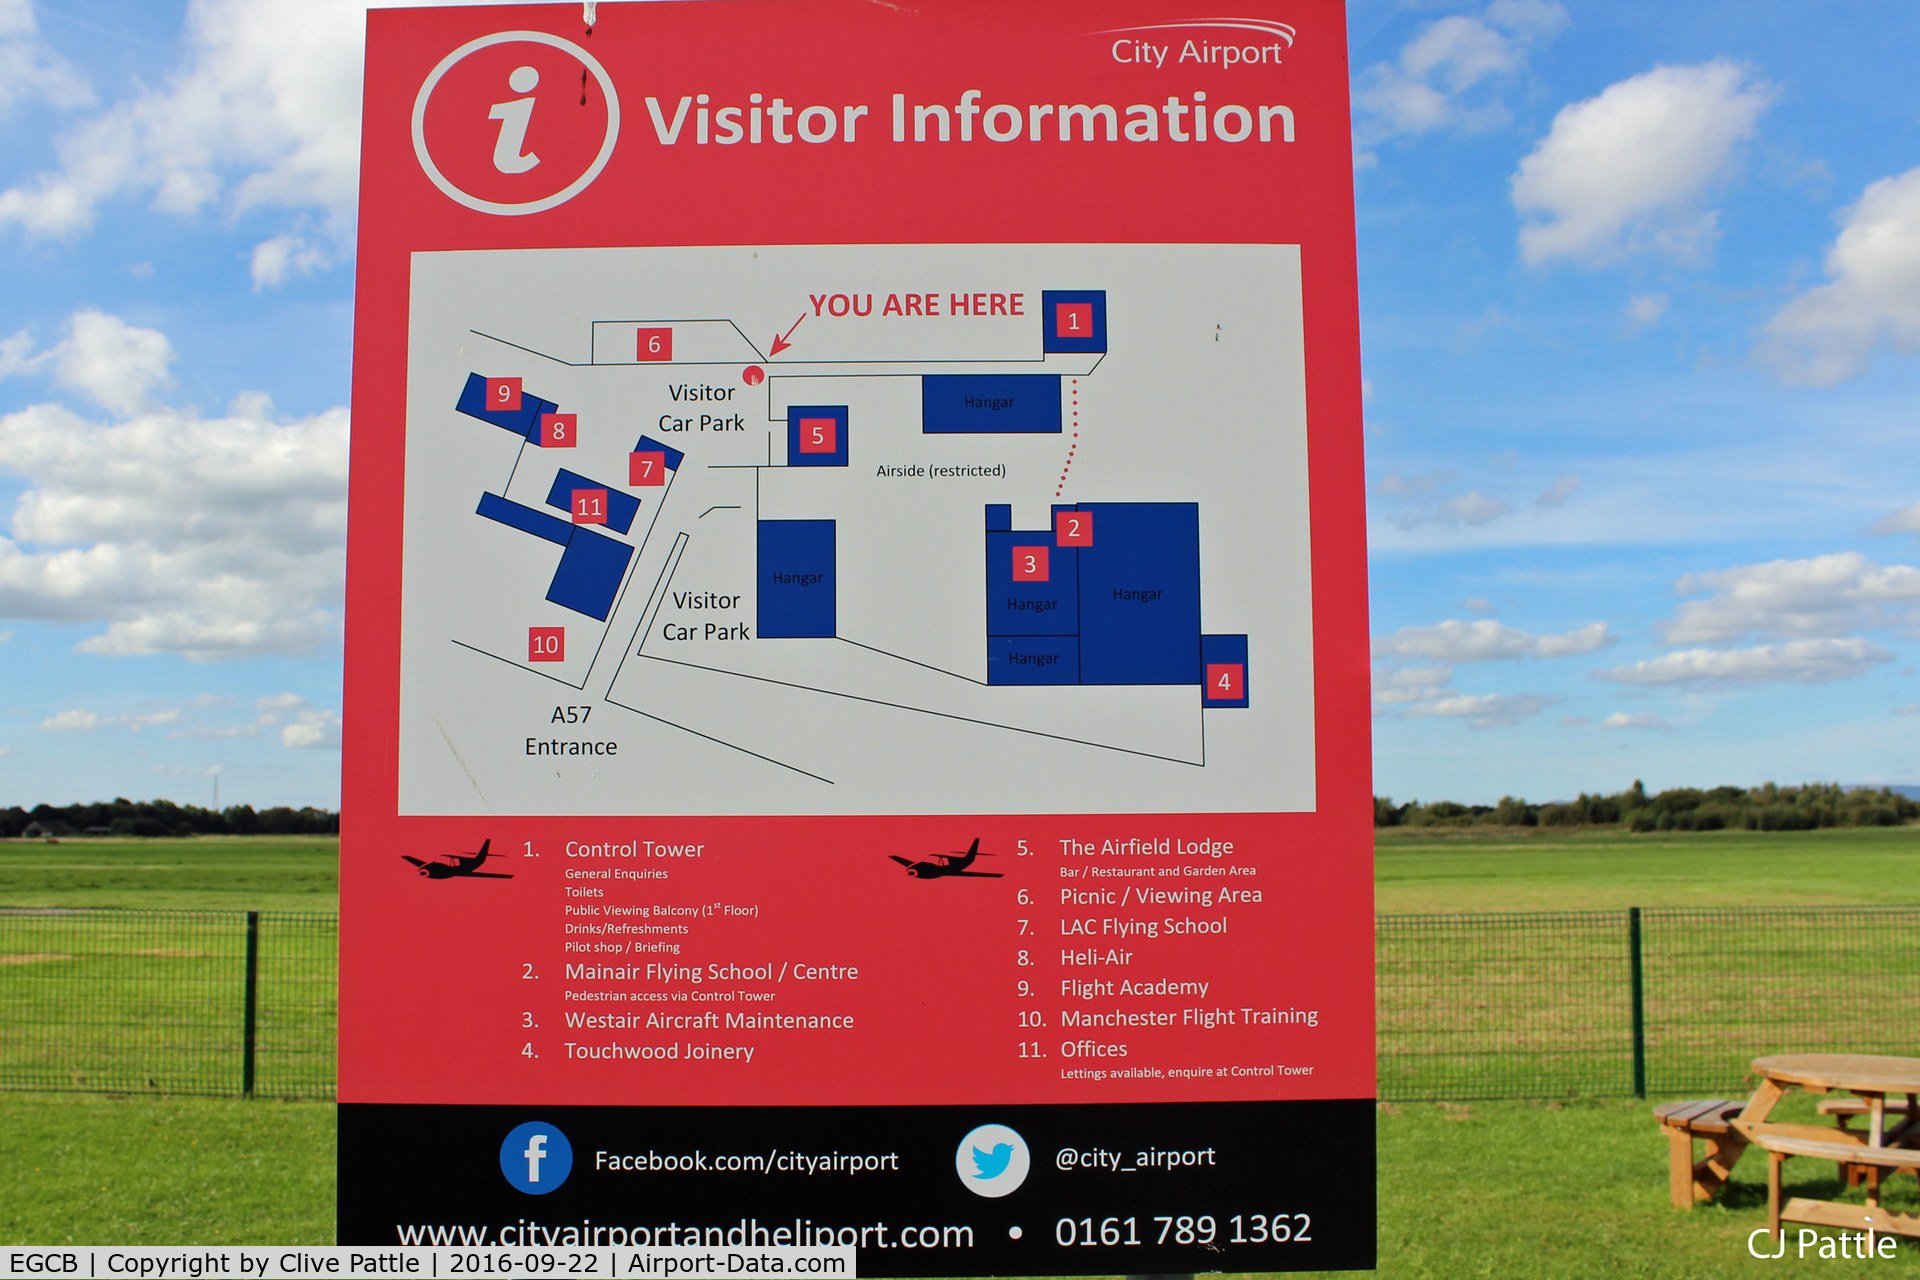 City Airport Manchester, Manchester, England United Kingdom (EGCB) - Manchester City Airport, Barton EGCB - Information sign